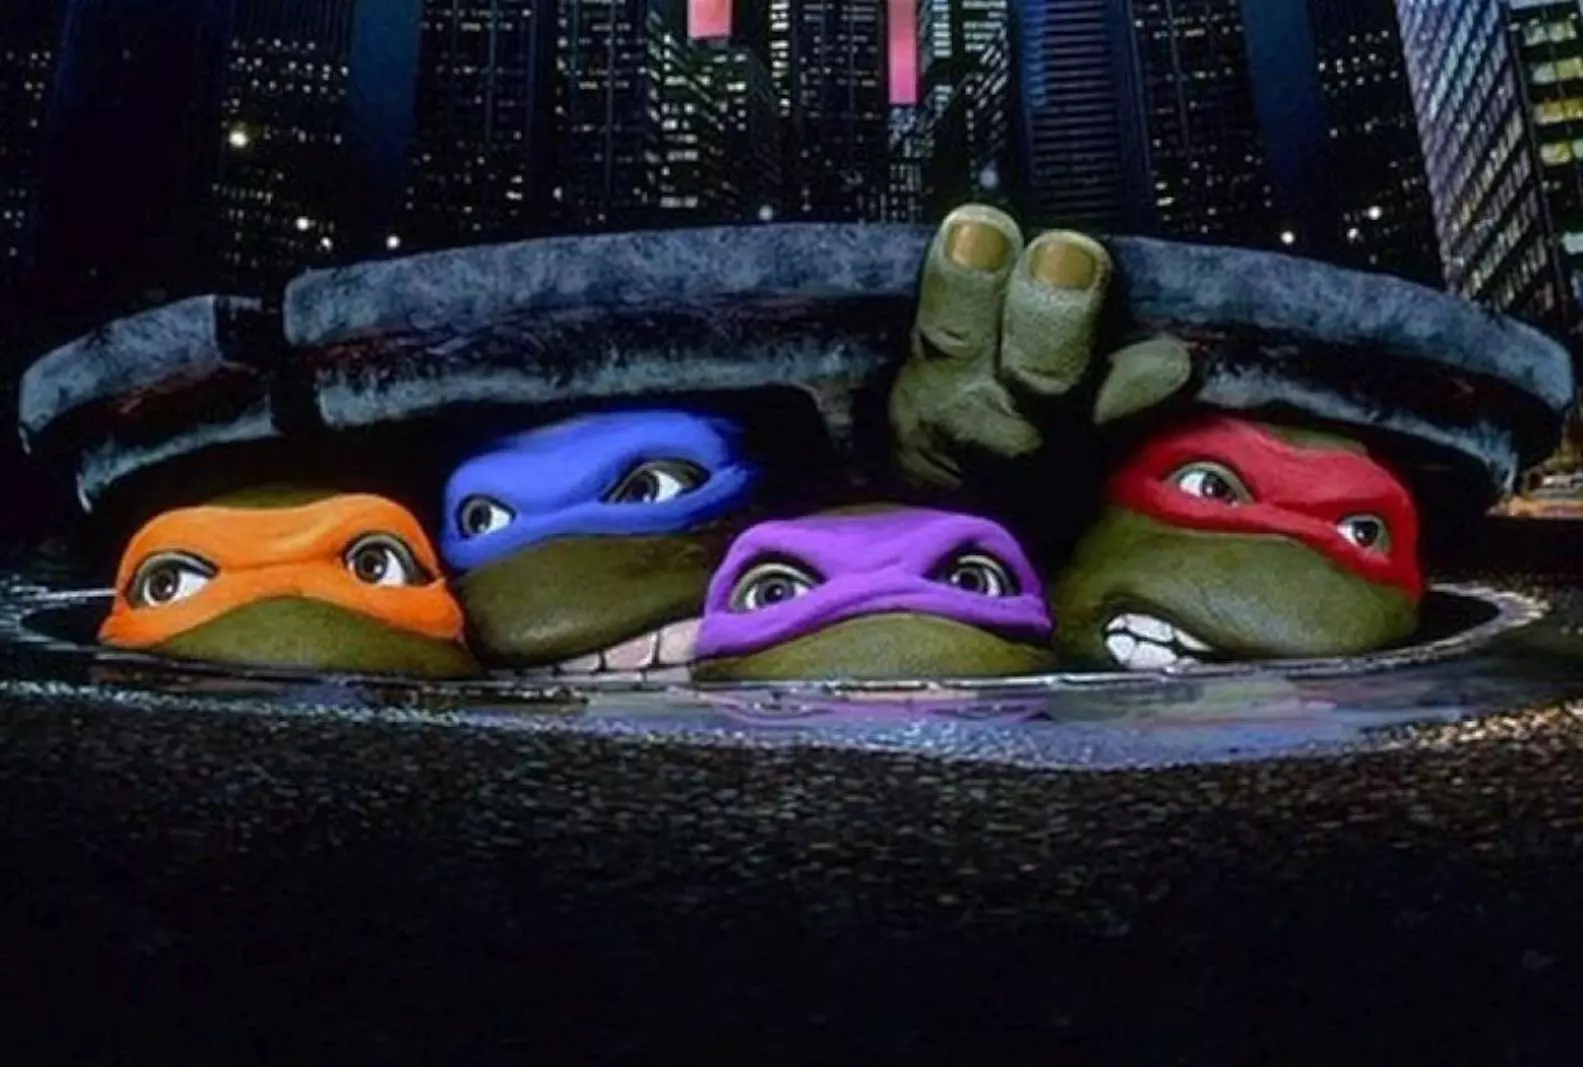 Movie review: The Teenage Mutant Ninja Turtles are back, and maybe better  than ever